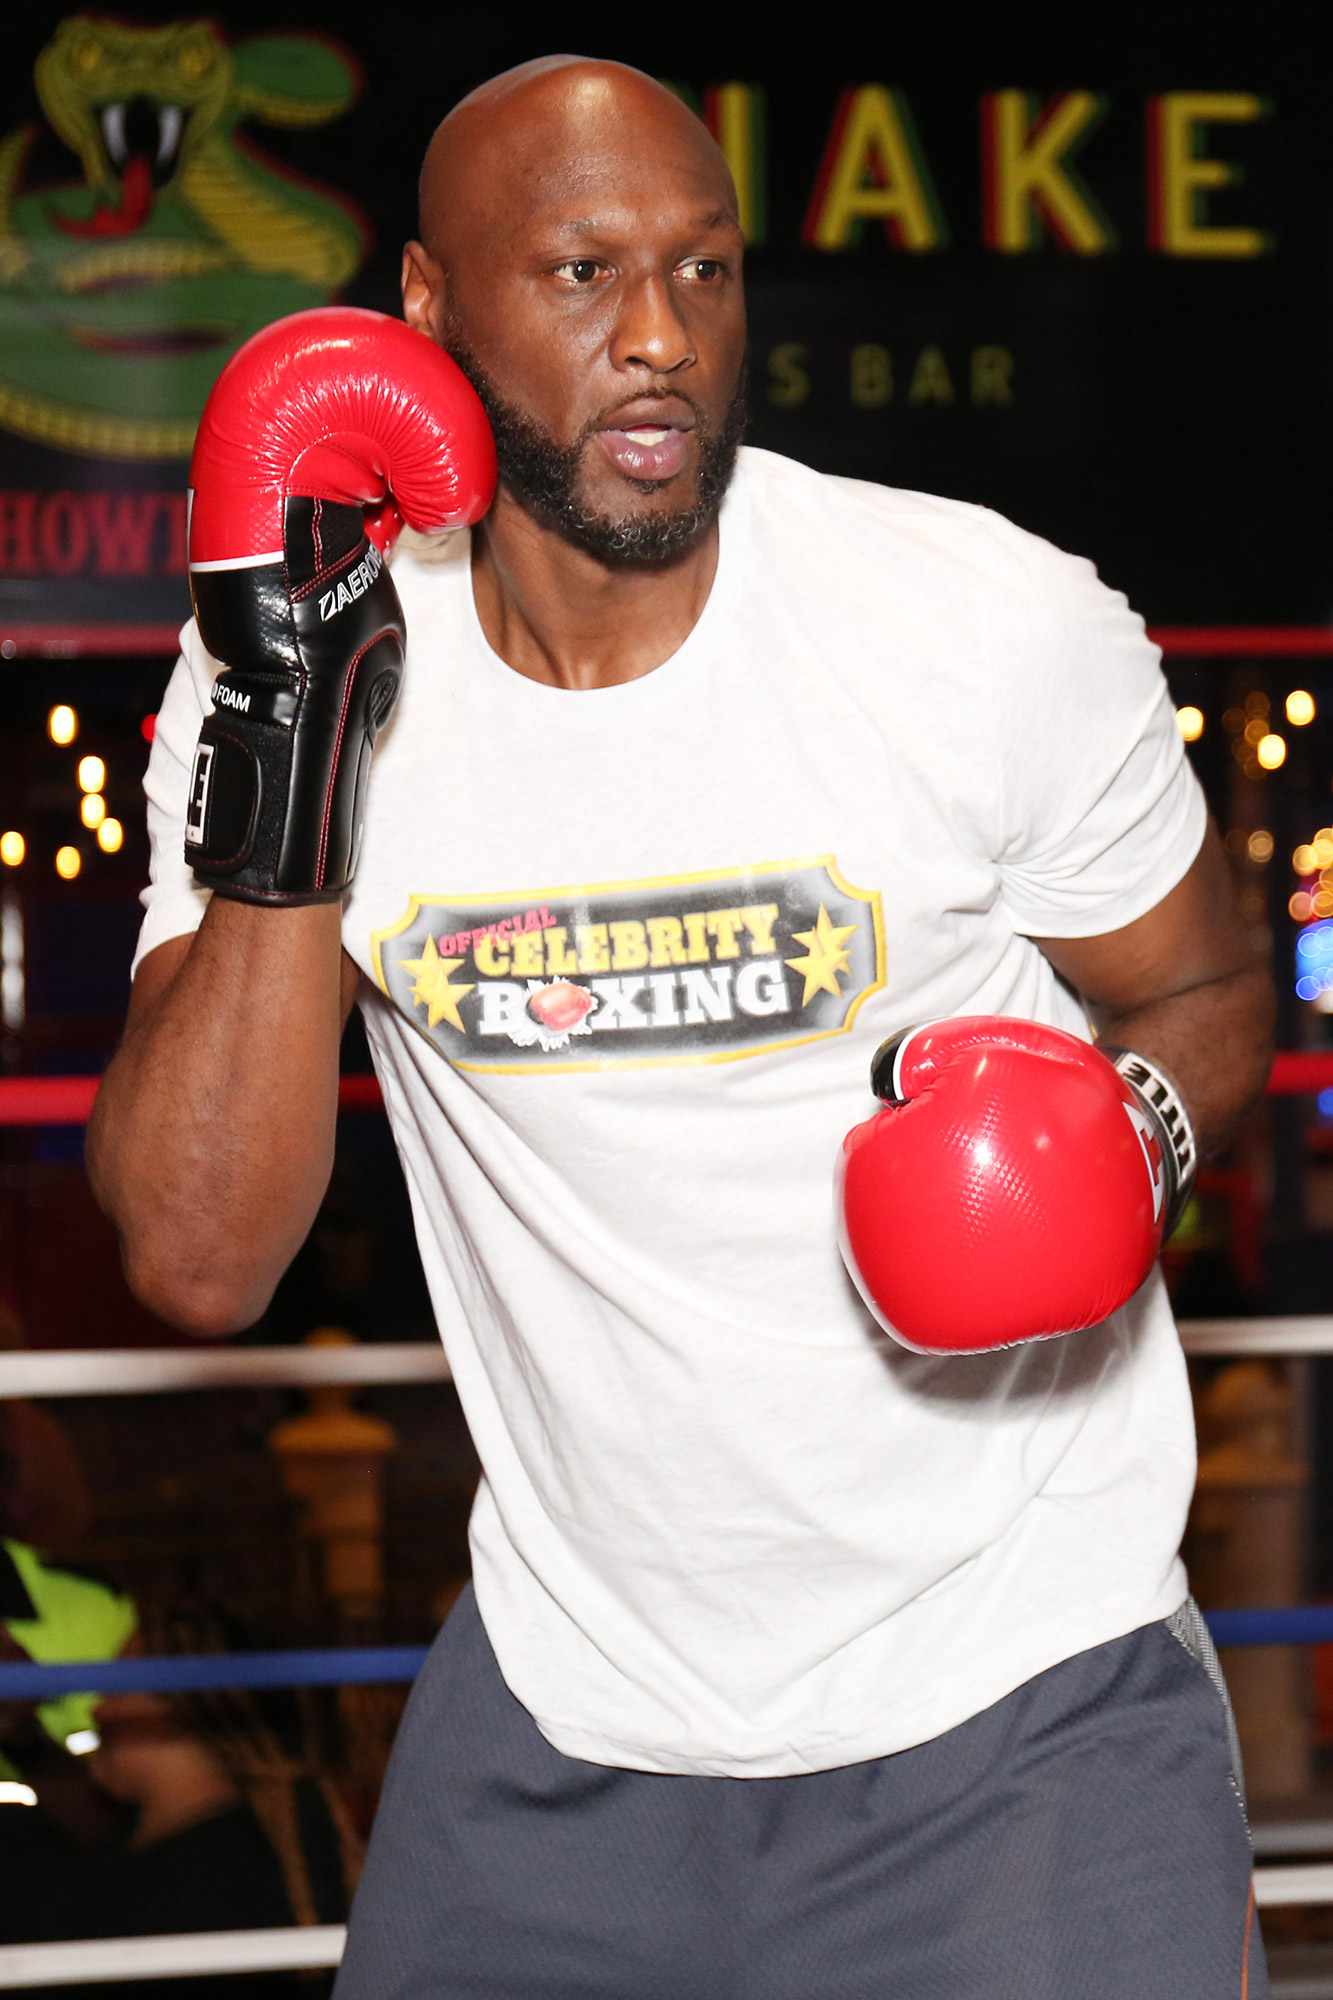 Lamar Odom training at the Showboat hotel for the Lamar Odom vs. Aaron Carter Celebrity Boxing match Lamar Odom v Aaron Carter, Training Session, Showboat Hotel, Atlantic City, New Jersey - 08 Jun 2021